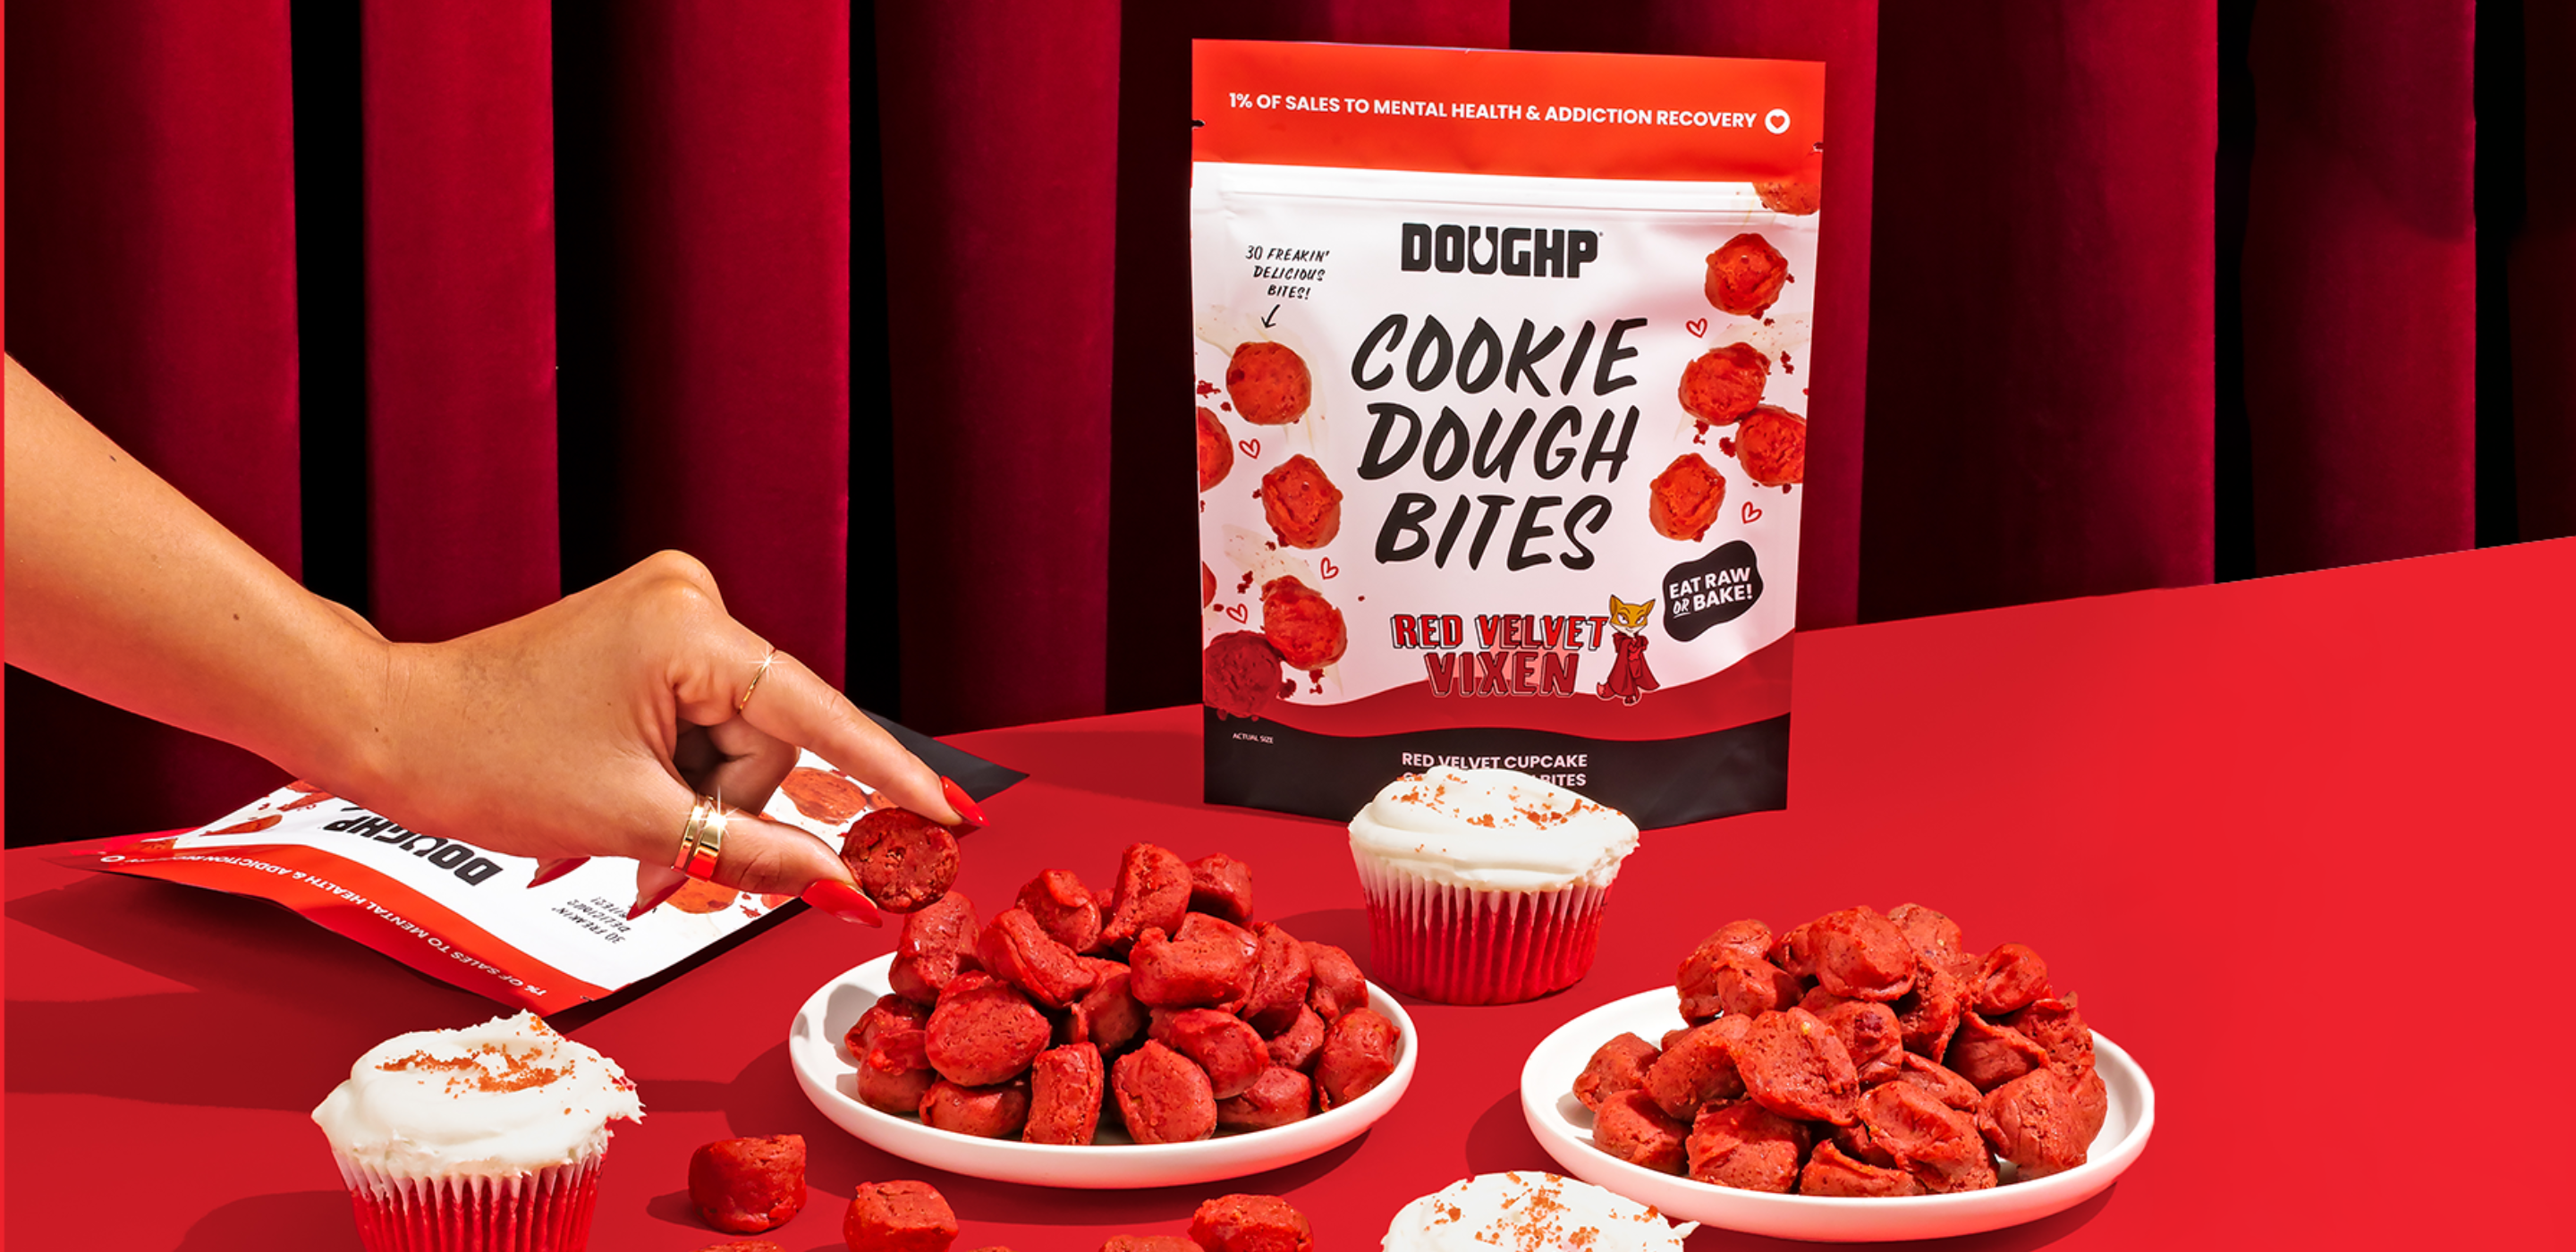 Doughp’s Limited-Edition Red Velvet Vixen Cookie Dough Returns for Valentine’s Day